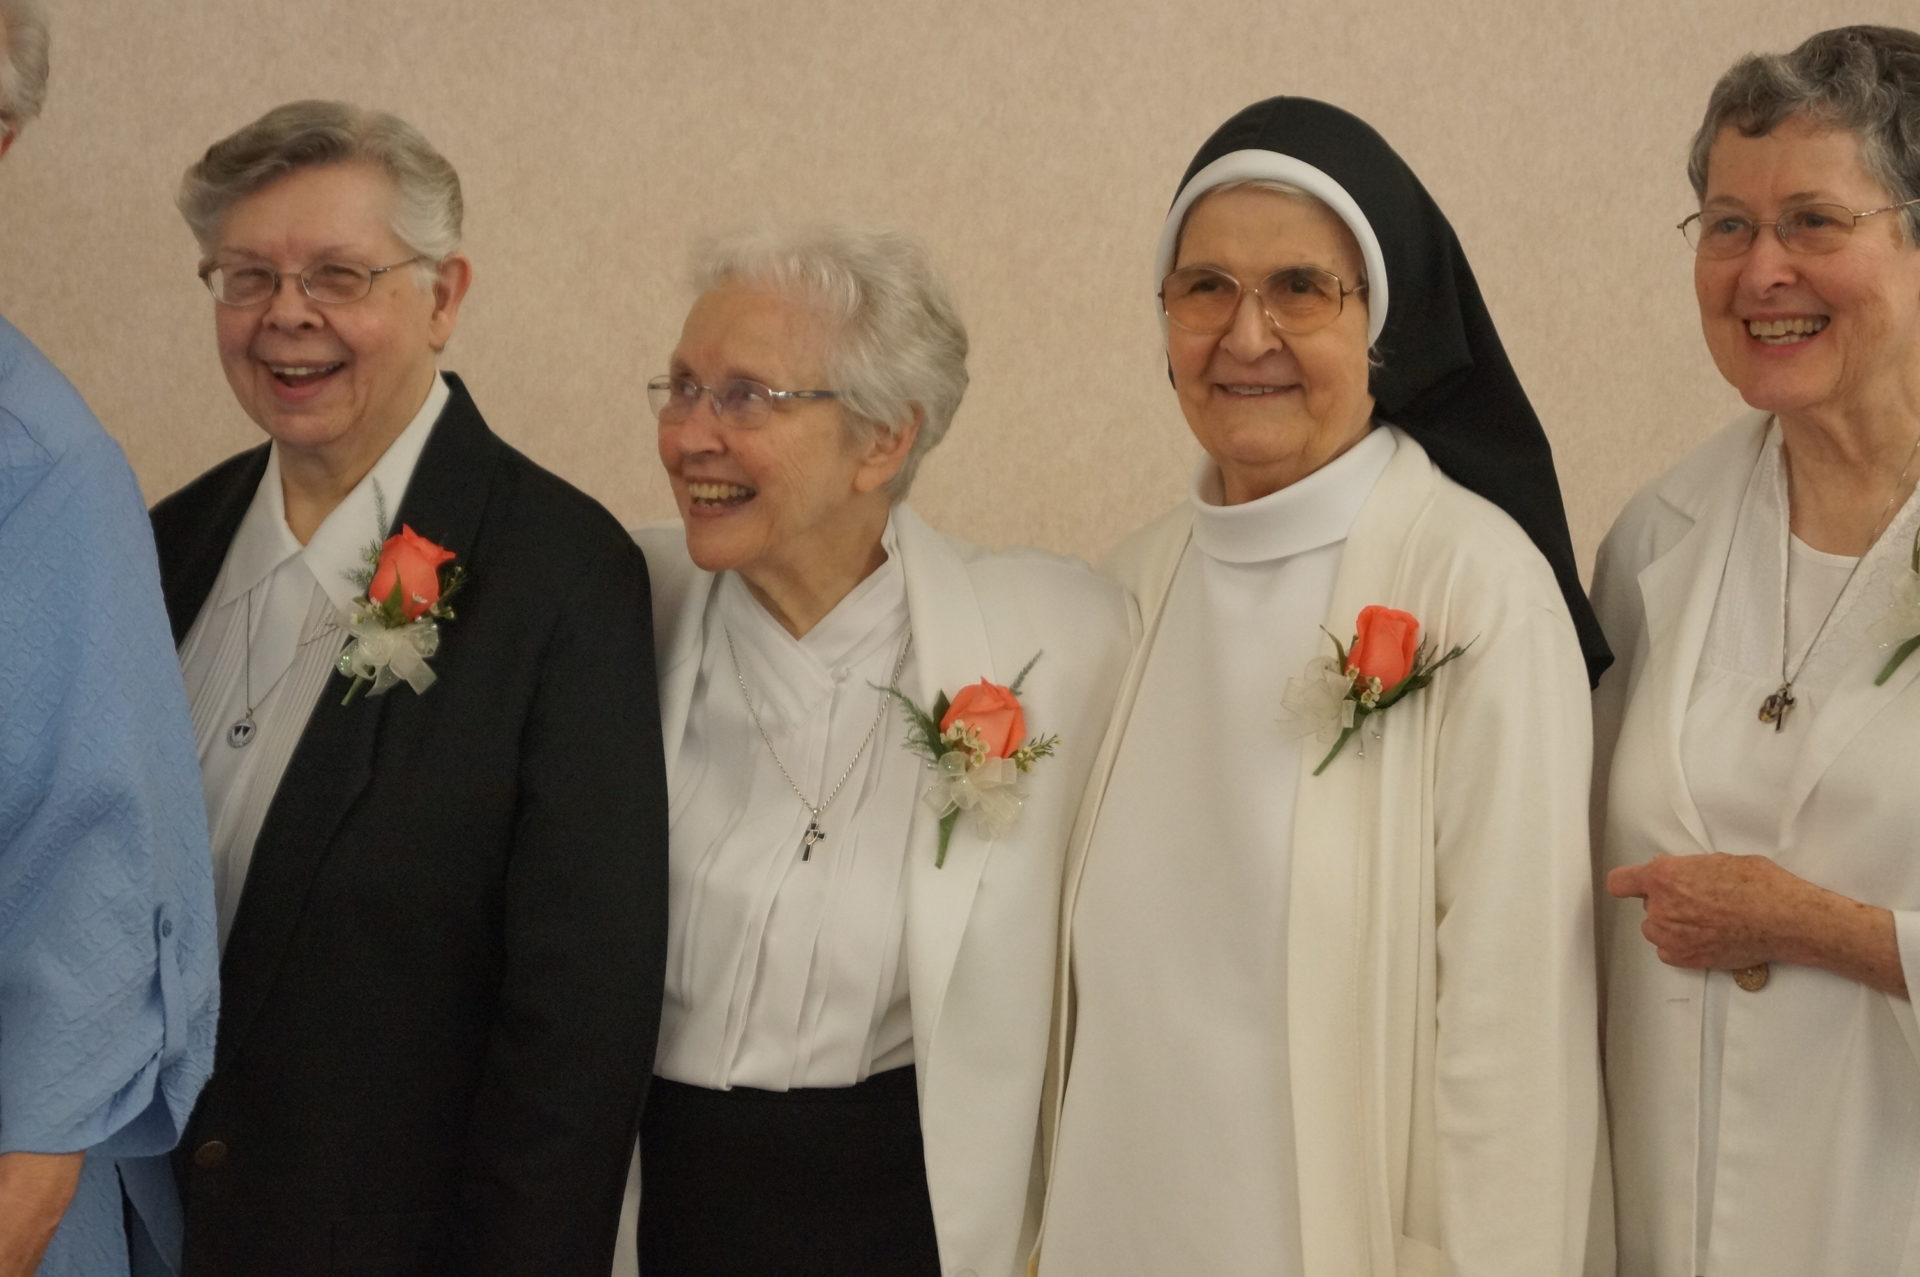 Sister Regina Marie (2nd from L) with her fellow sisters